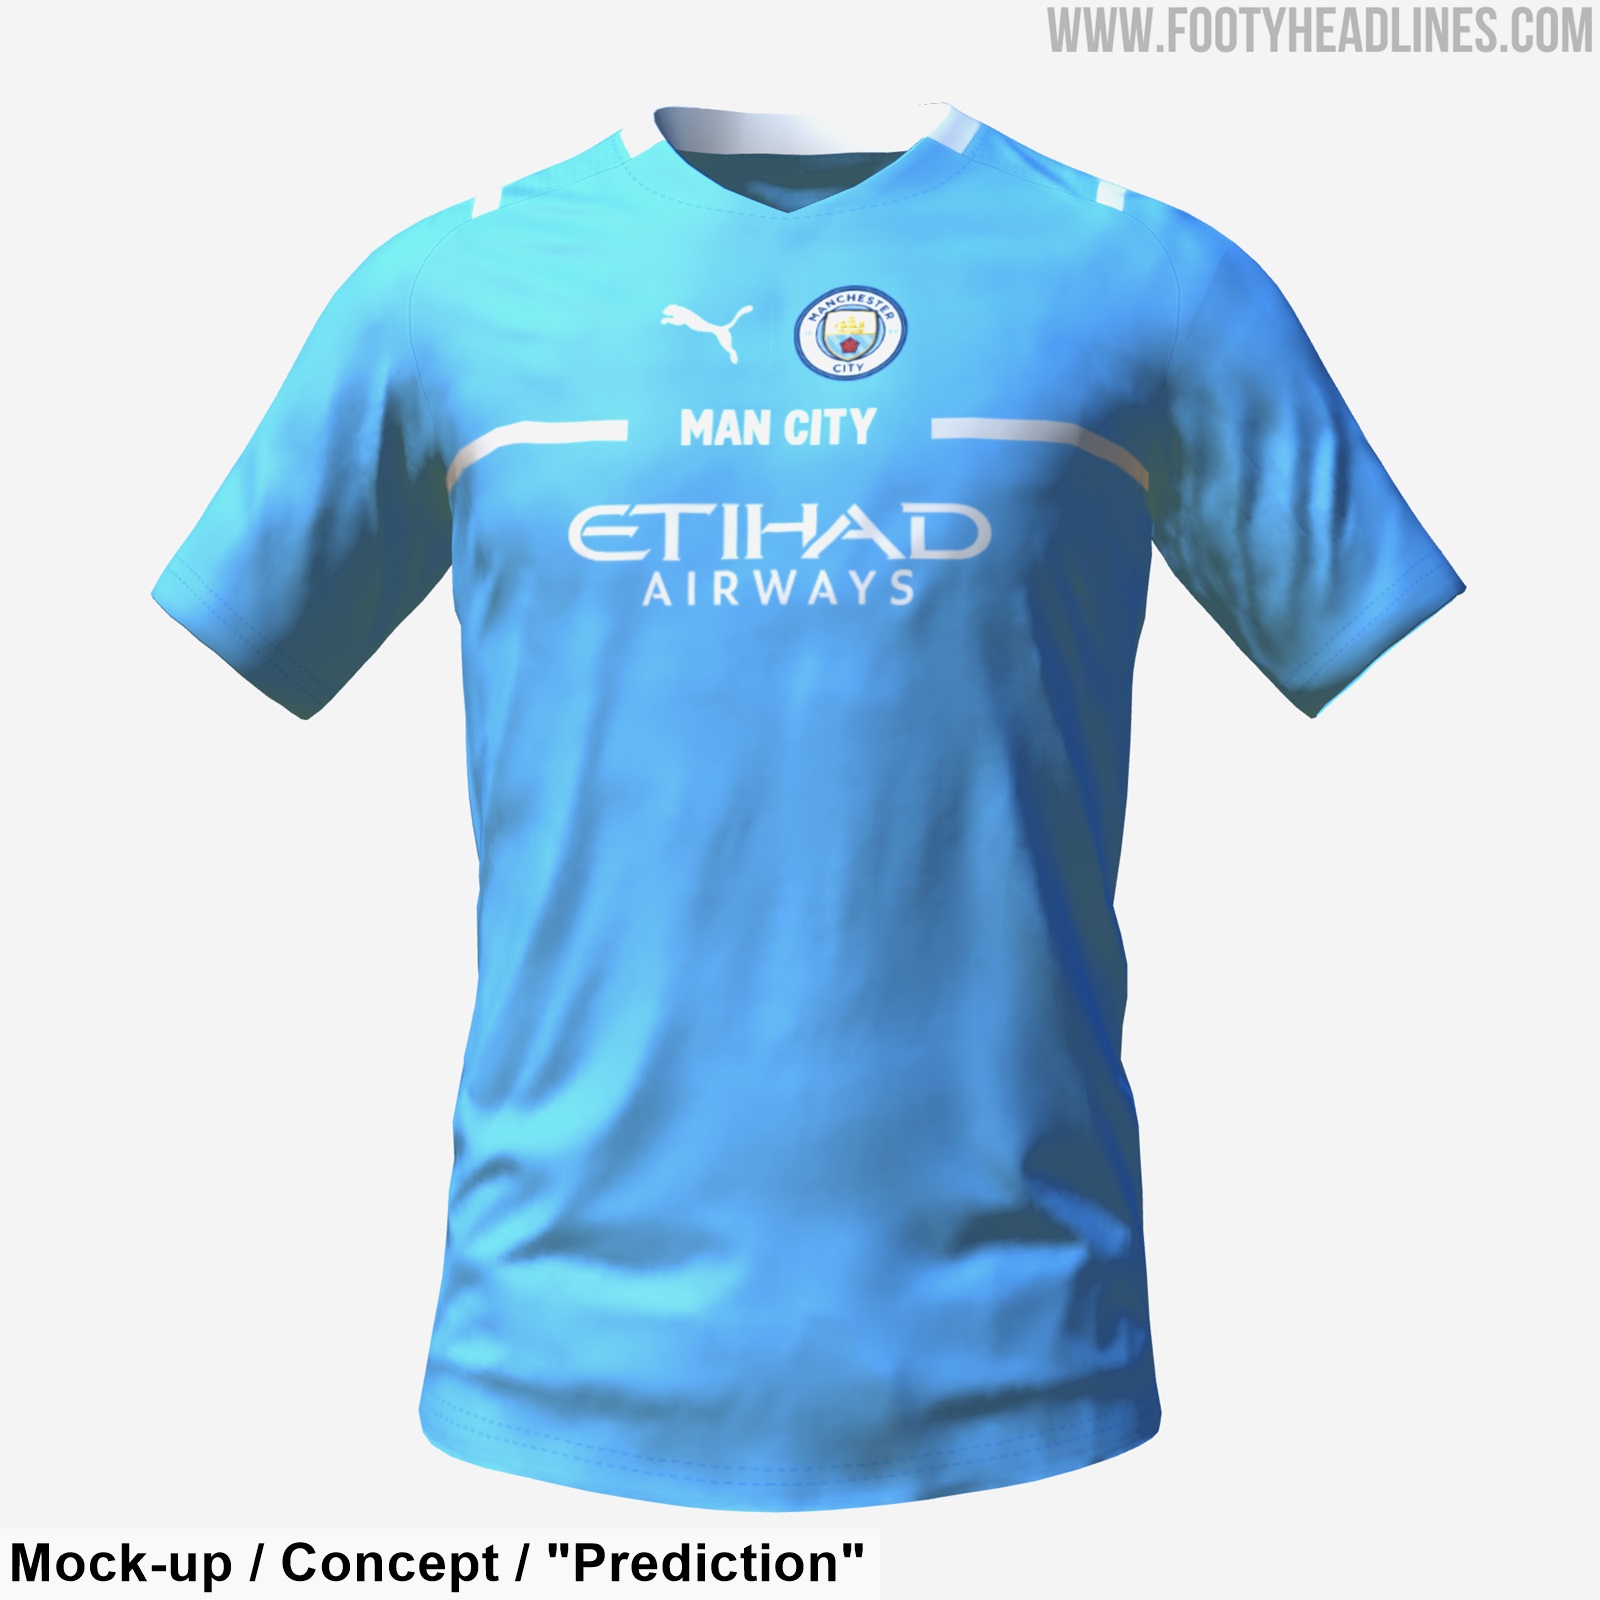 Puma Manchester City 21-22 Home Kit To Look Like This? - Headlines